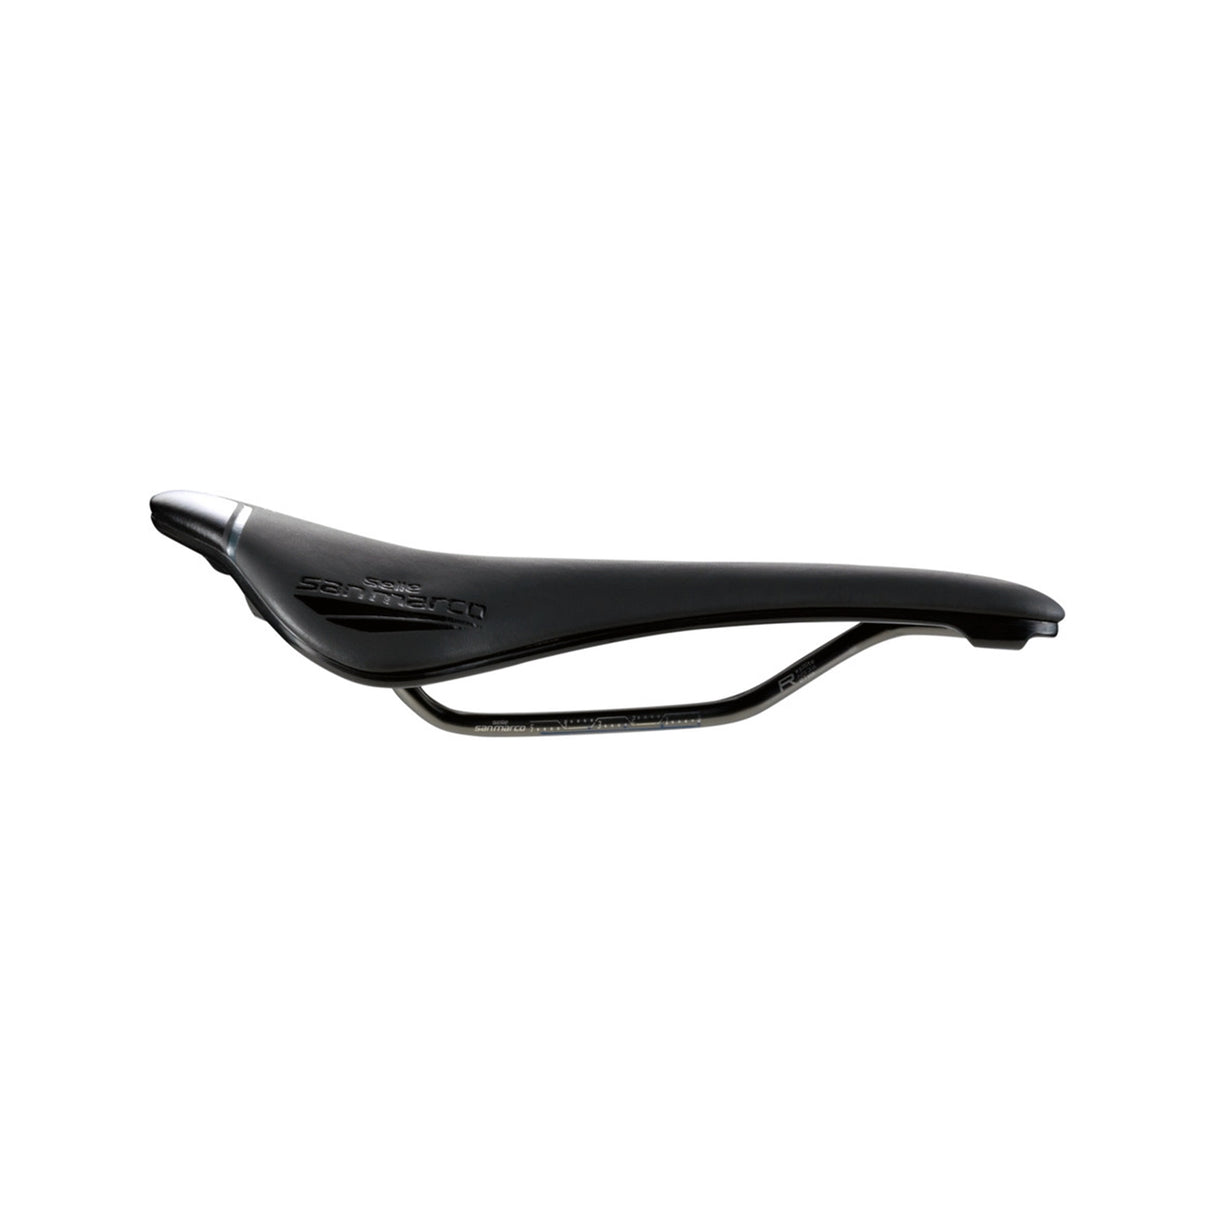 Selle San Marco Short Fit 2.0 Racing Open Saddle